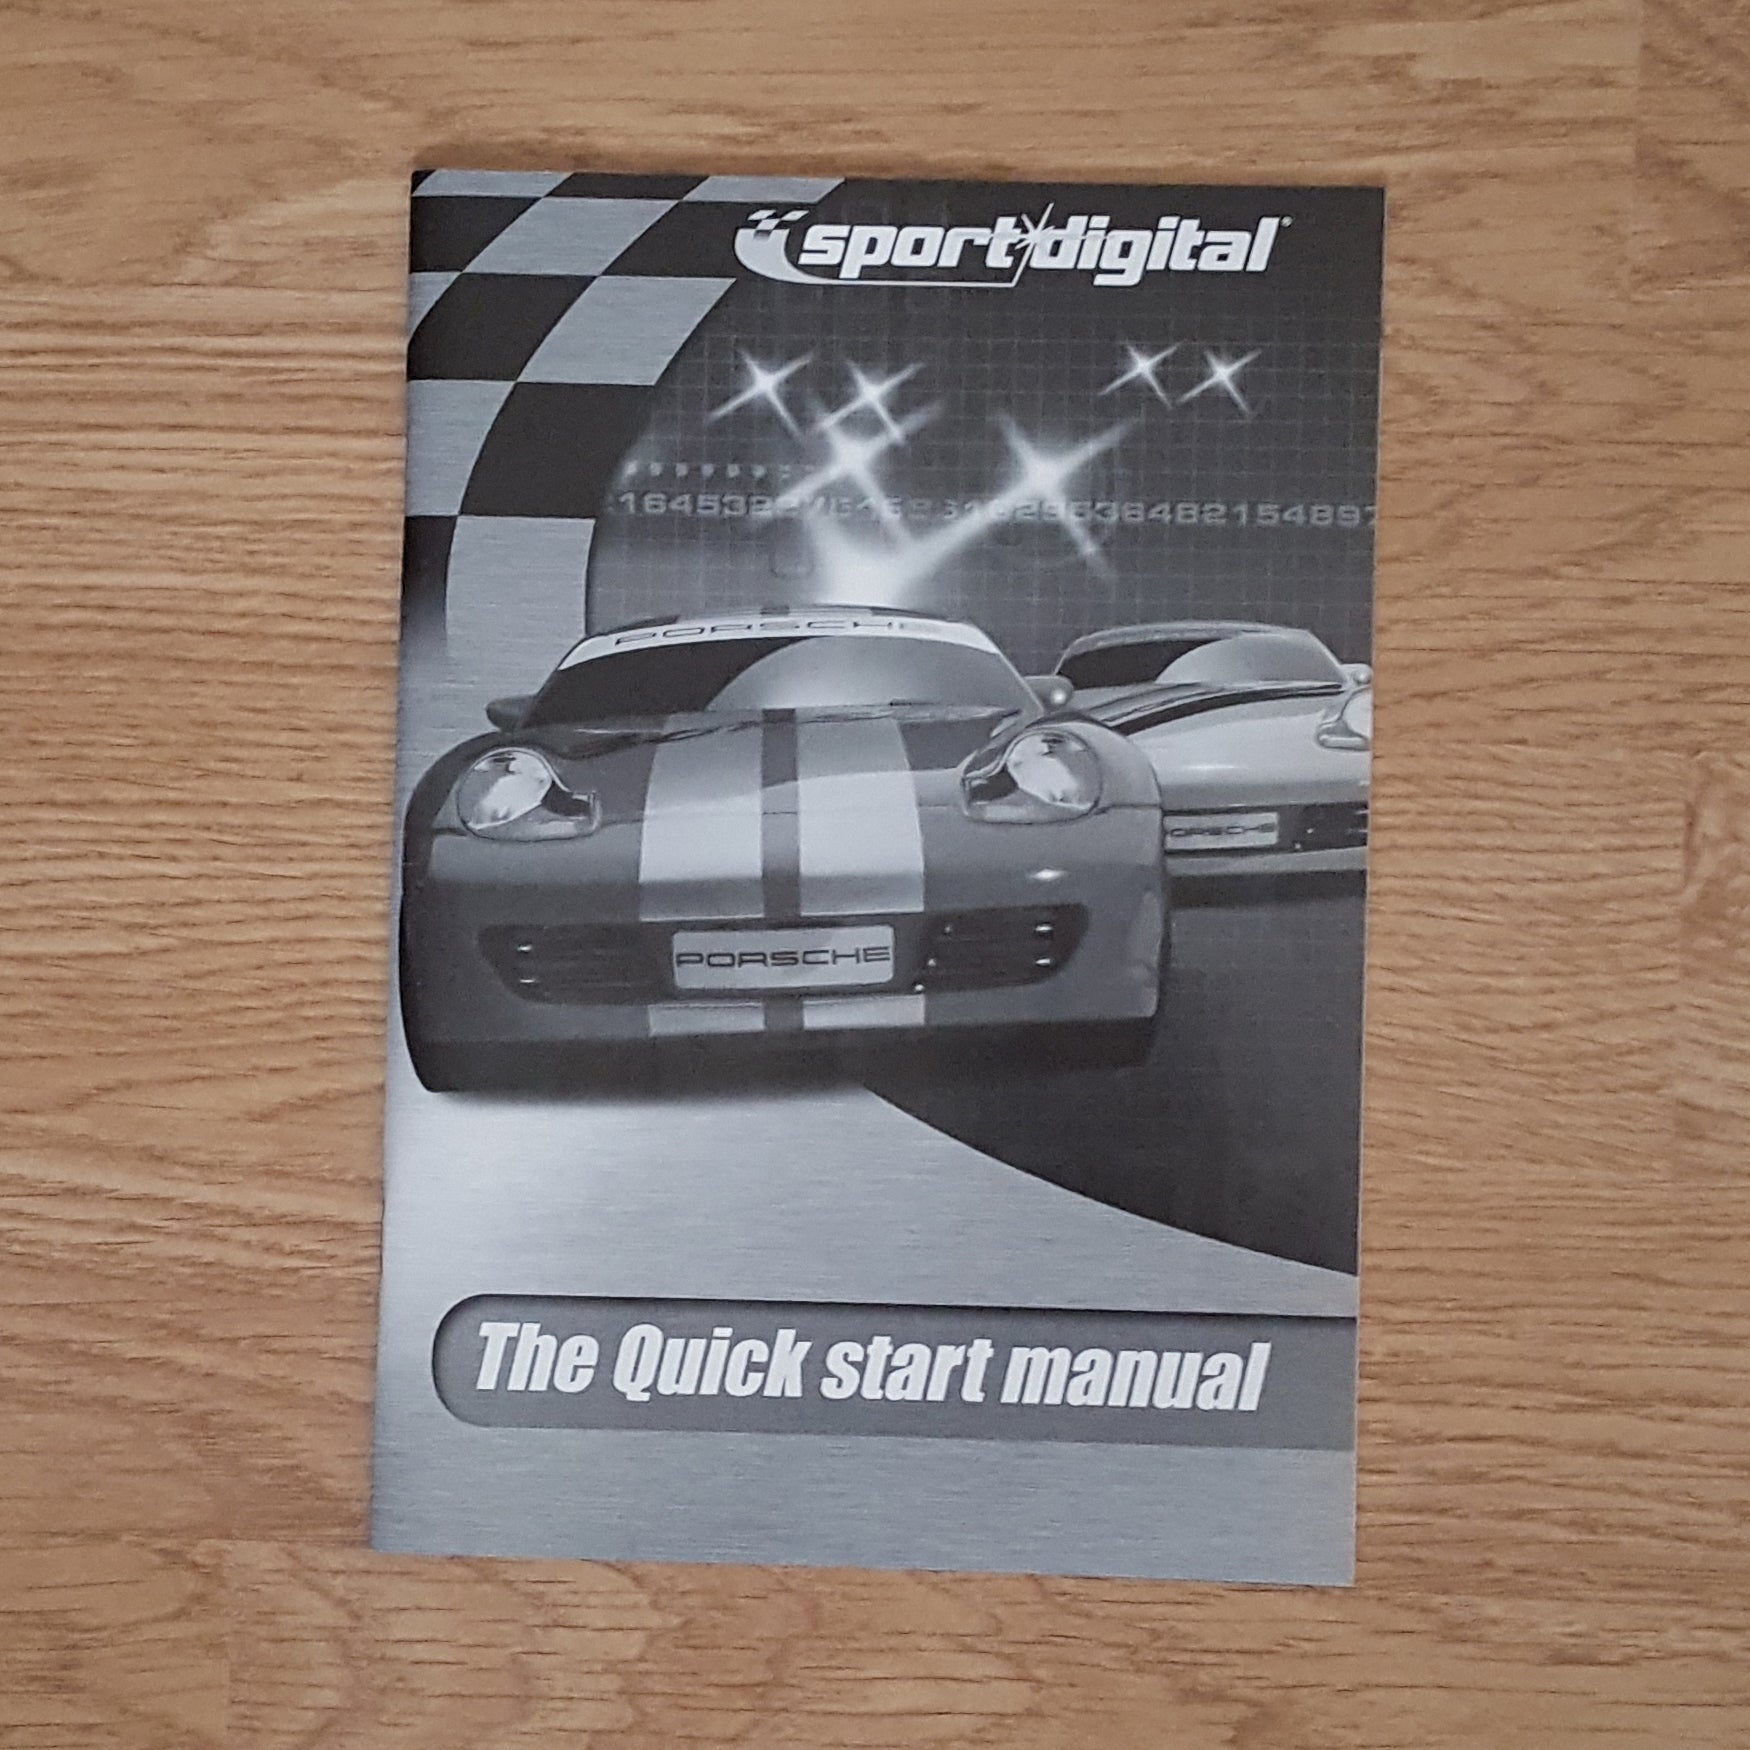 Scalextric Digital 6 Car Powerbase C7030 - The Quick Start Instruction Manual